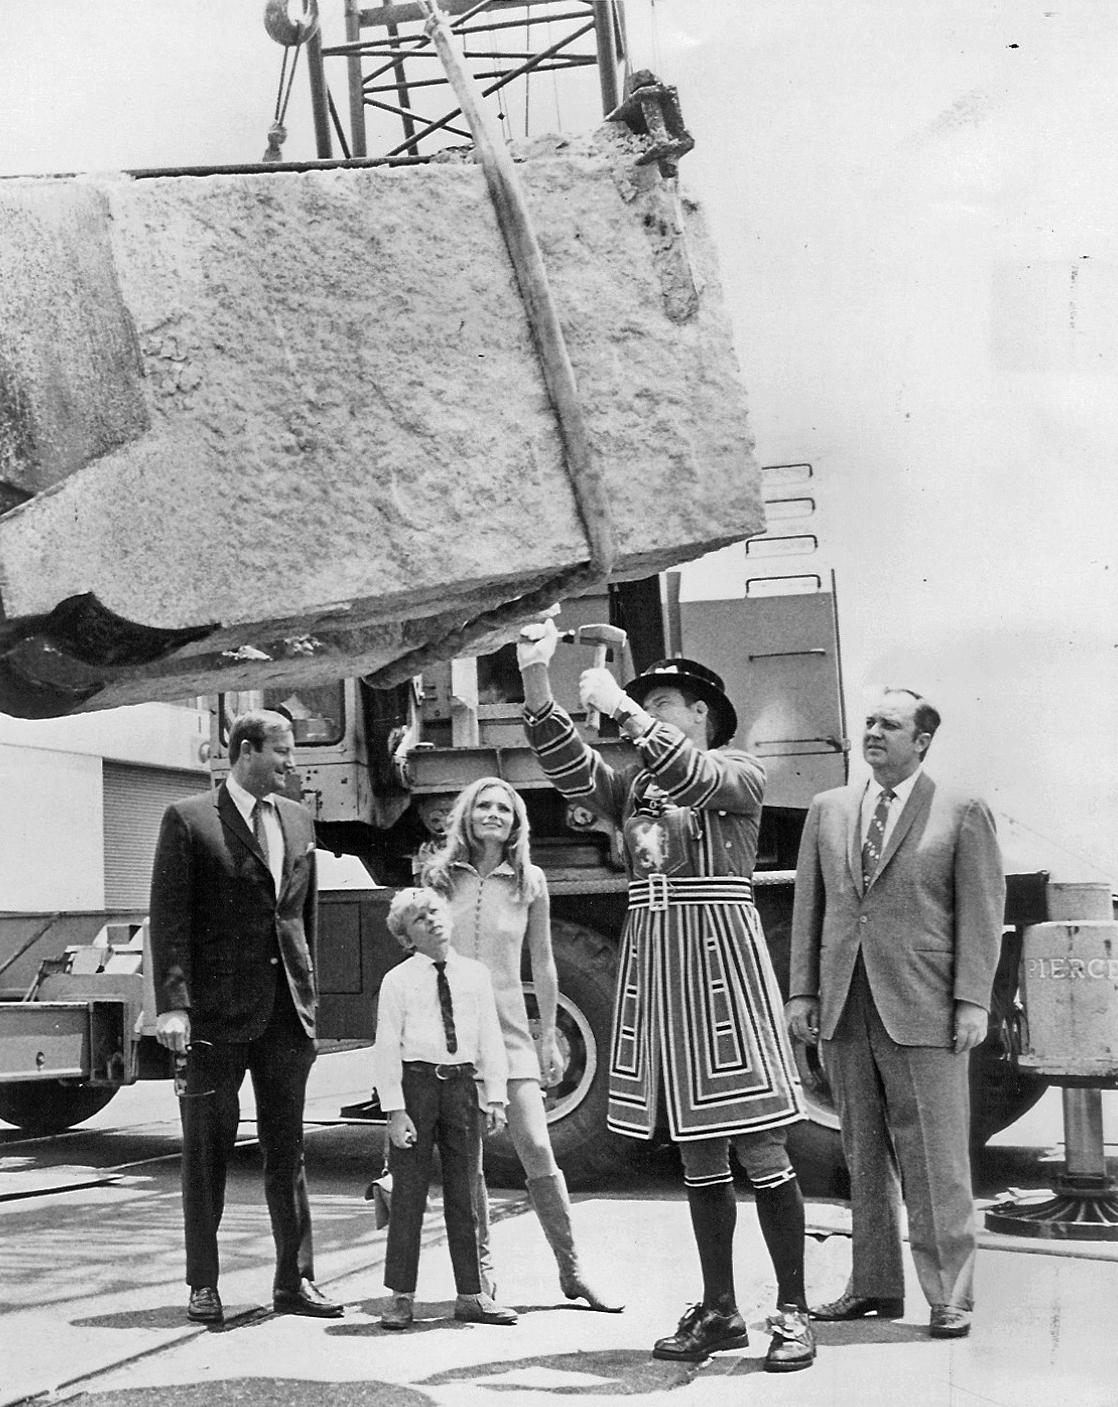 The McCulloch family, a "London Beefeater," and C.V. Wood watch as a granite block is unloaded in Arizona. Courtesy of Lake Havasu Museum of History.